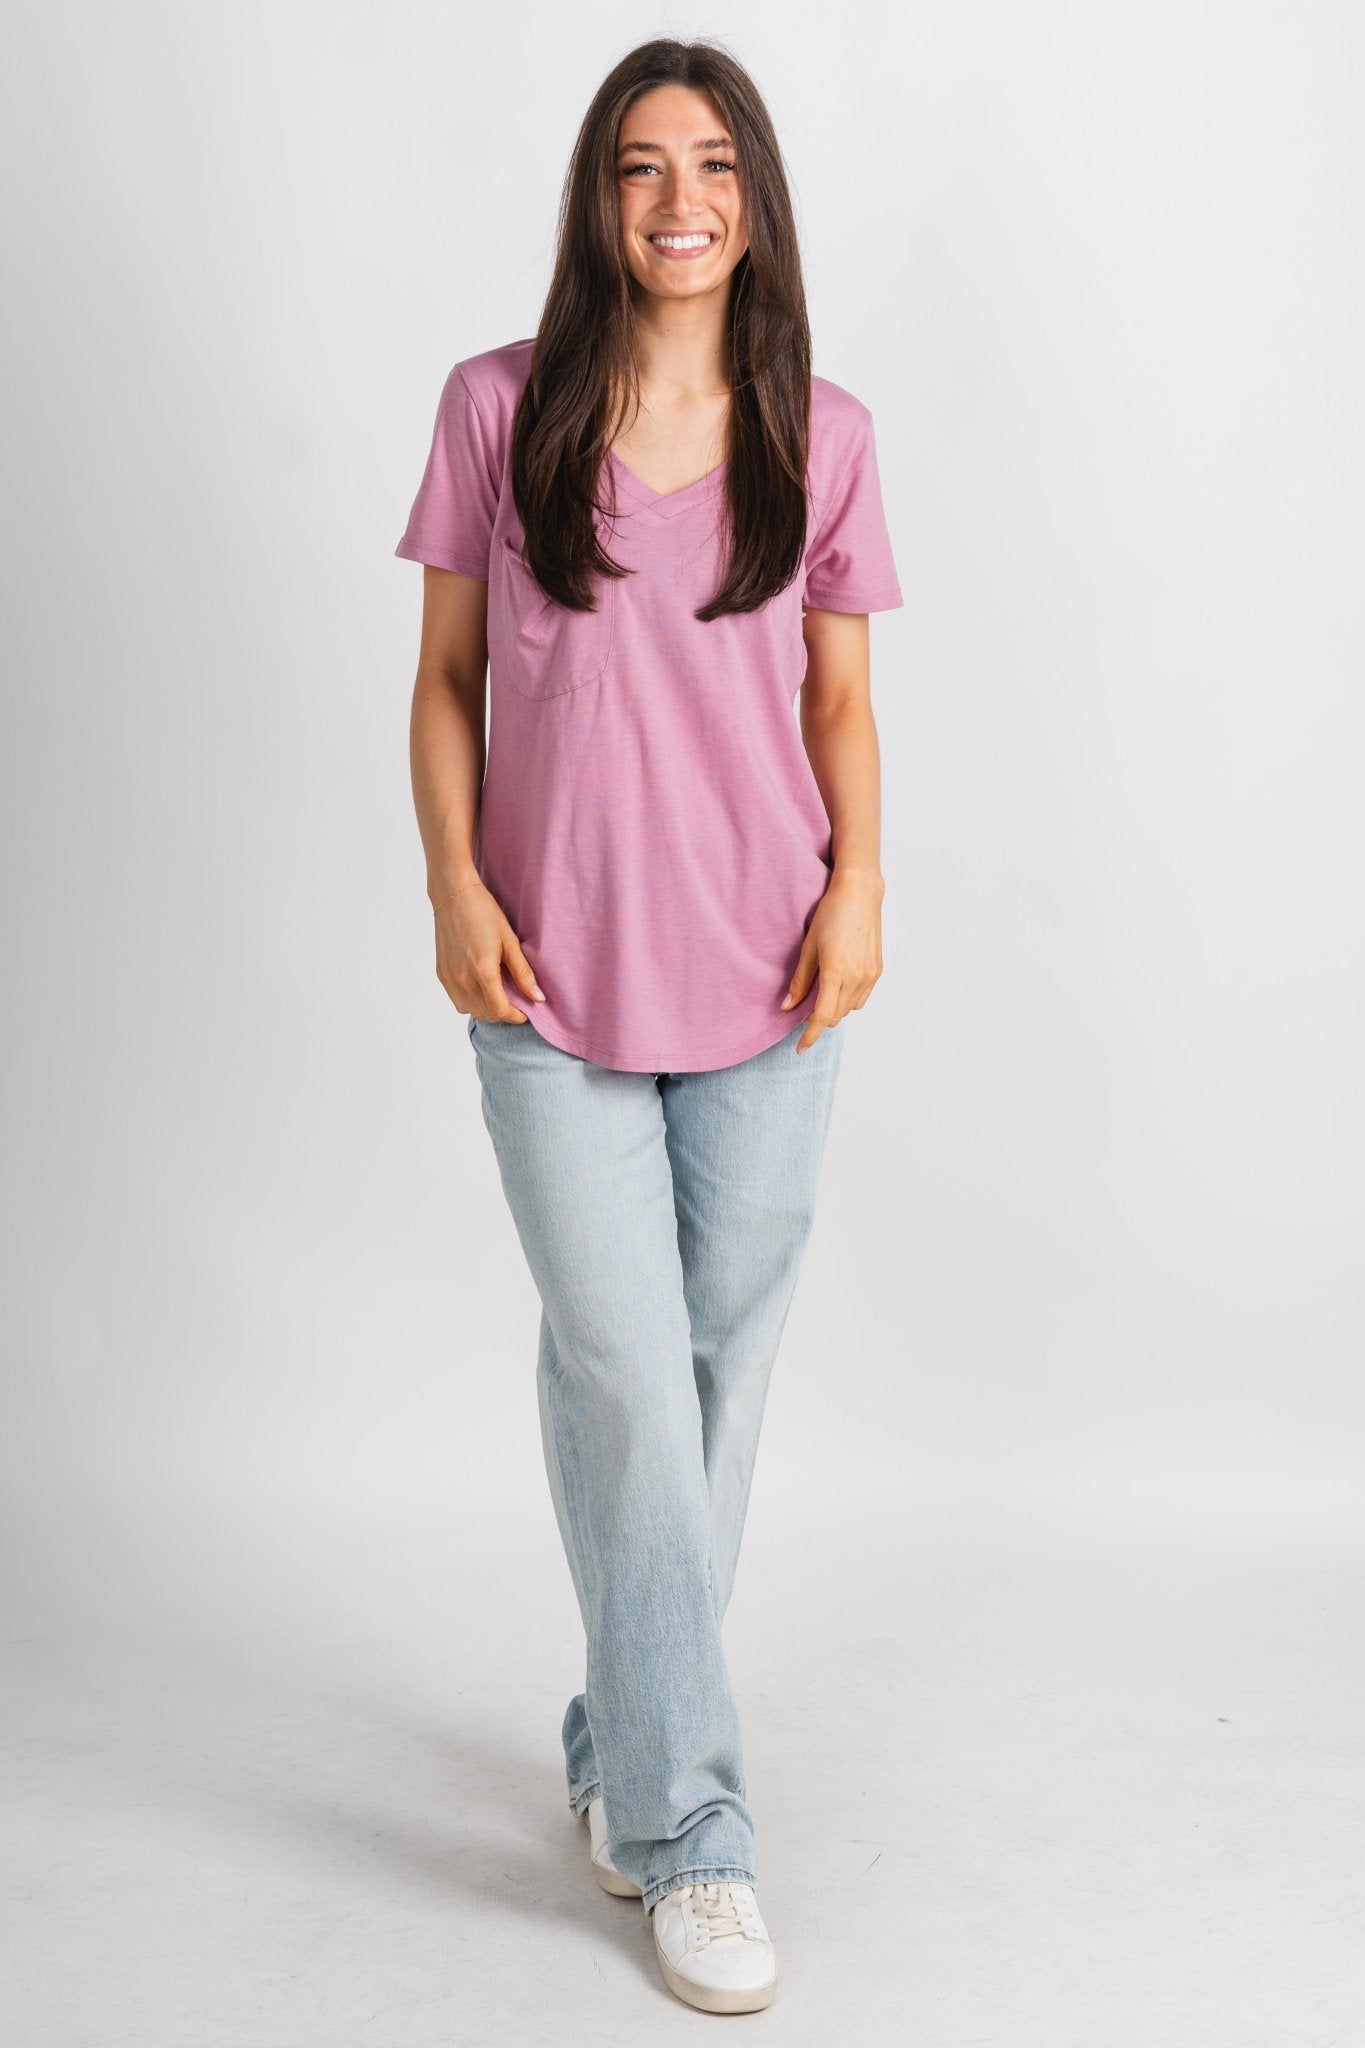 Z Supply pocket tee dusty orchid - Z Supply Top - Z Supply Clothing at Lush Fashion Lounge Trendy Boutique Oklahoma City